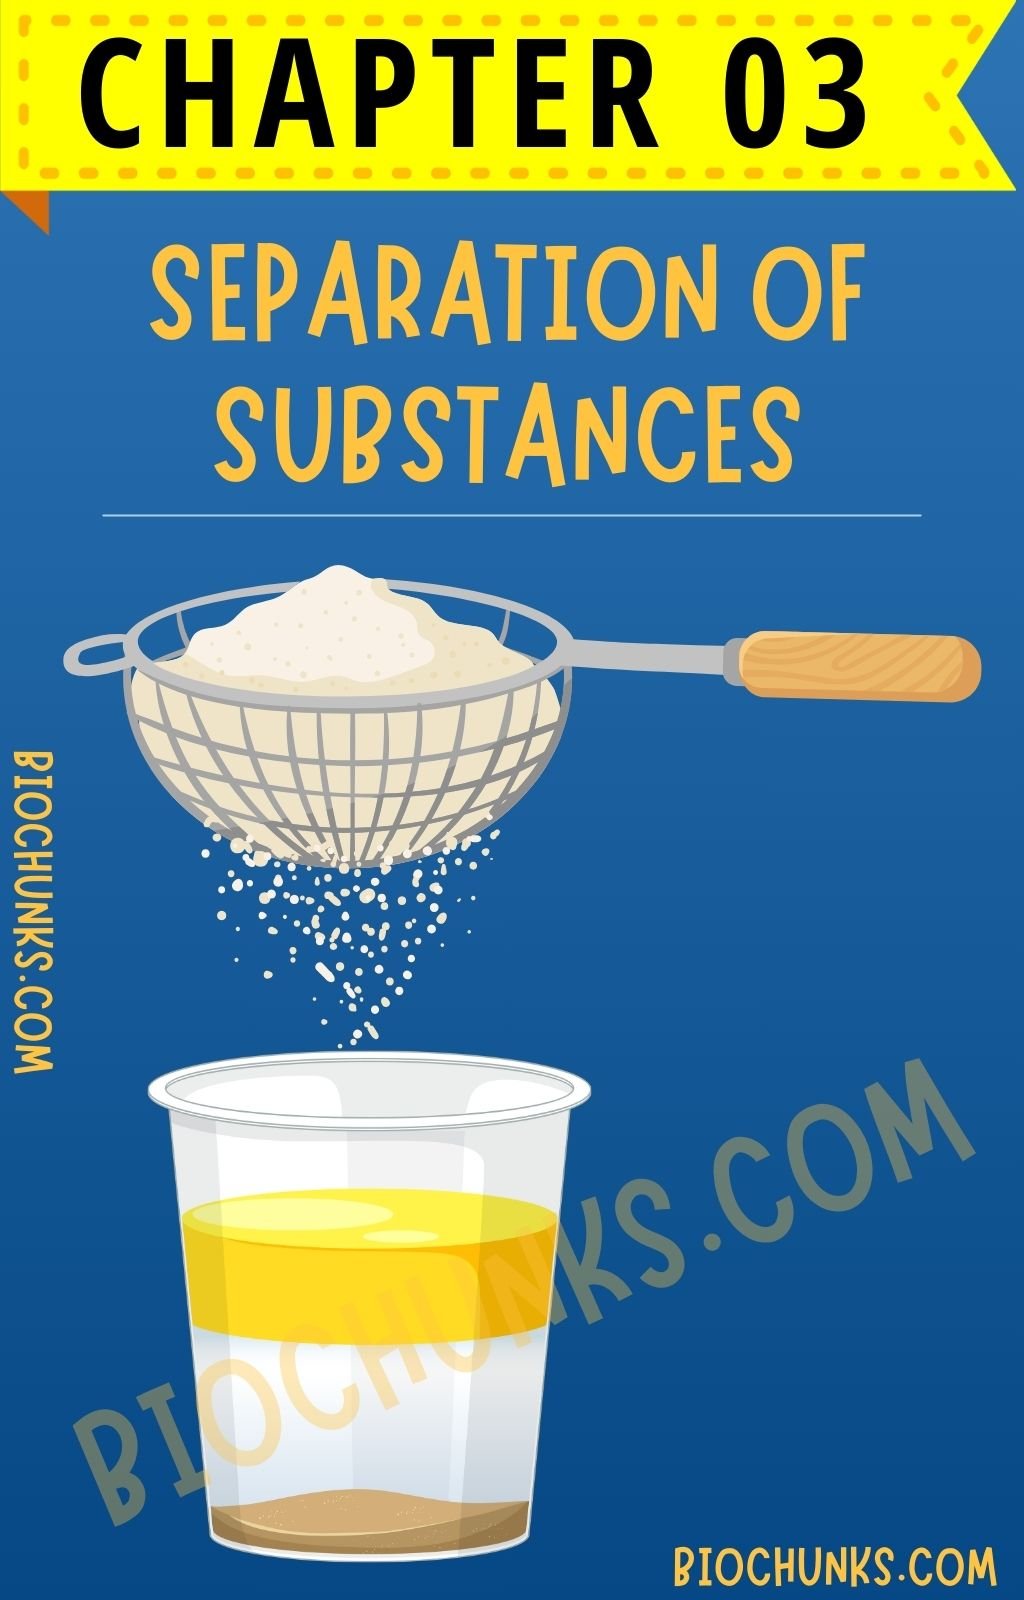 Separation of substances biochunks.com Chapter 01 Class 6th